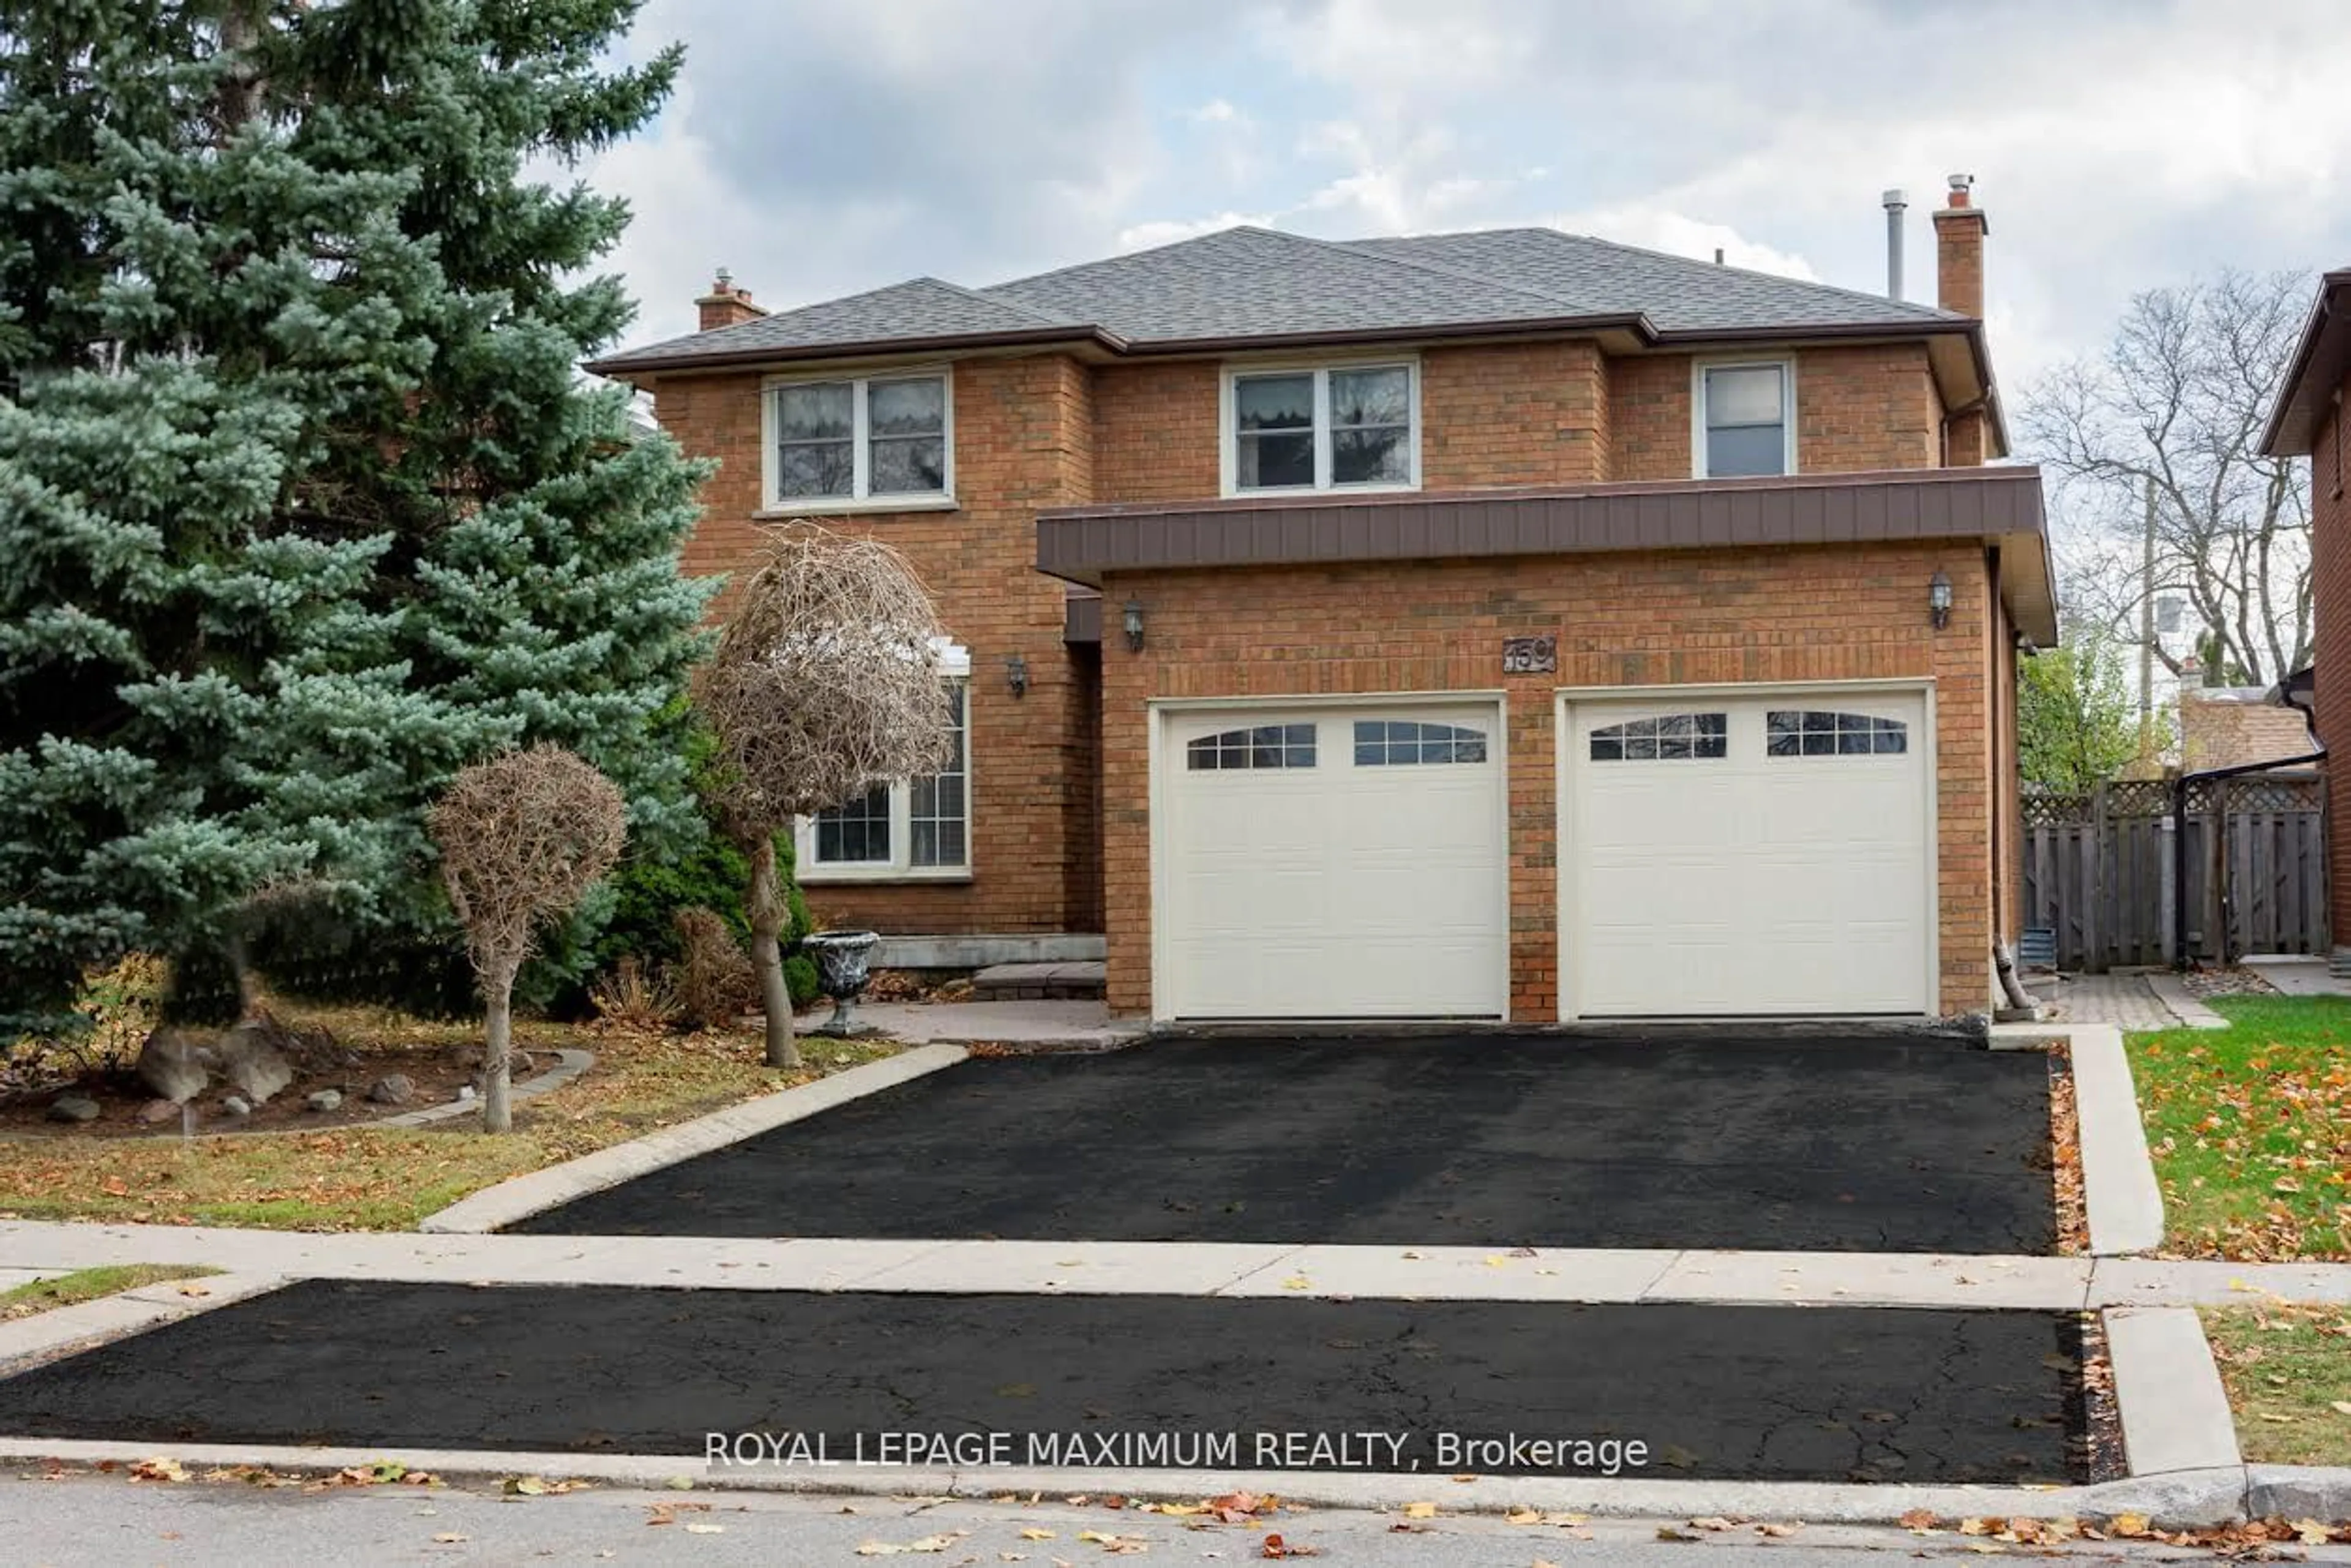 Home with brick exterior material for 150 Beechnut Rd, Vaughan Ontario L4L 6T7